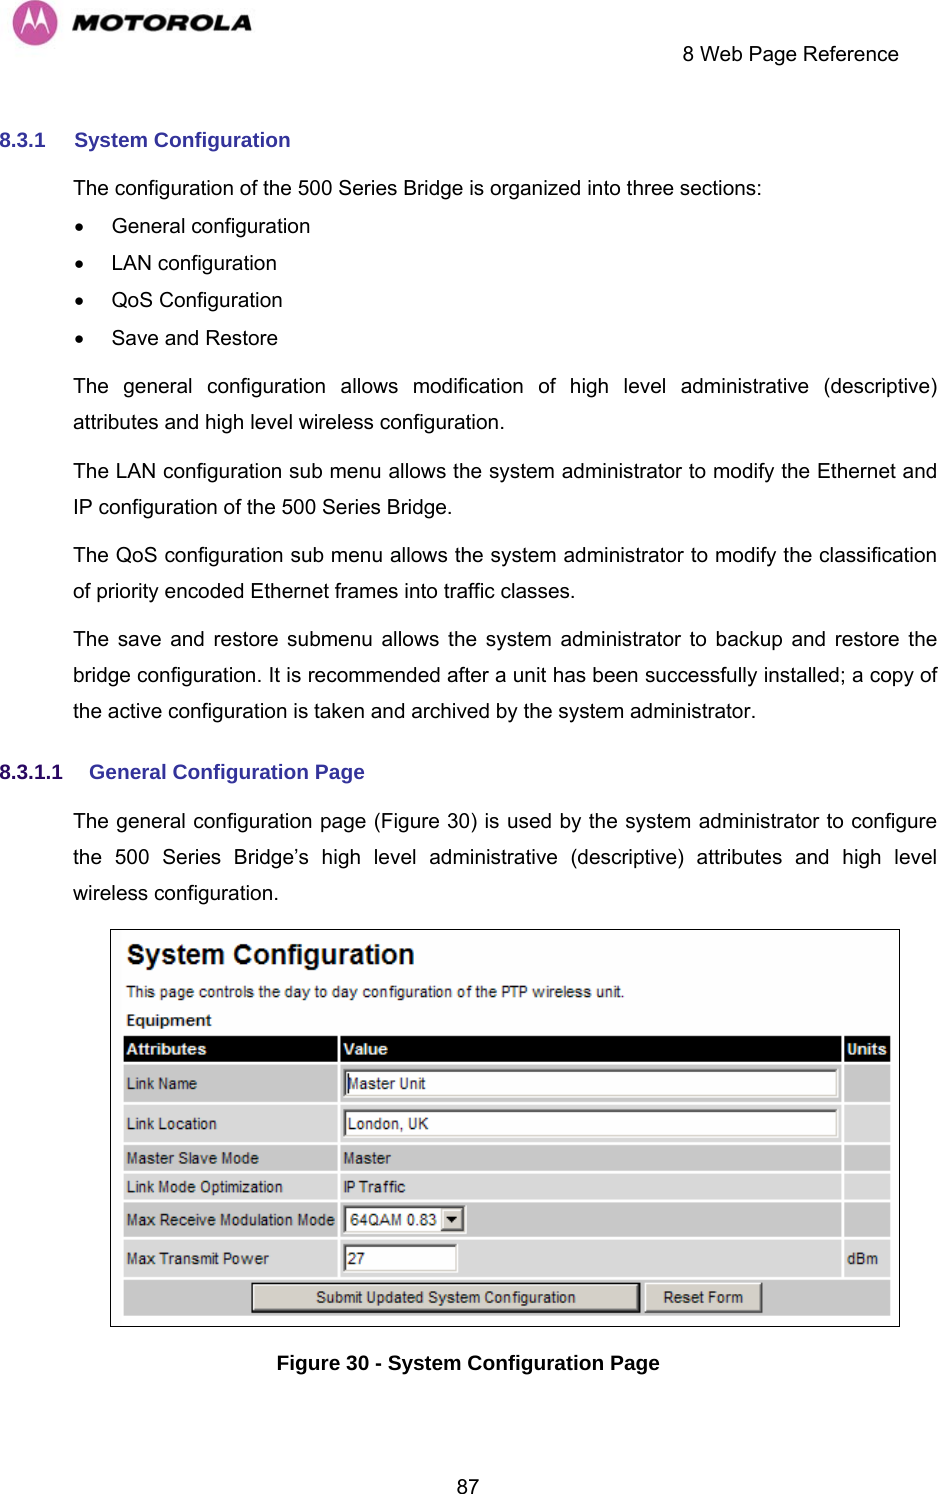     8 Web Page Reference  878.3.1  System Configuration The configuration of the 500 Series Bridge is organized into three sections: • General configuration • LAN configuration • QoS Configuration •  Save and Restore The general configuration allows modification of high level administrative (descriptive) attributes and high level wireless configuration. The LAN configuration sub menu allows the system administrator to modify the Ethernet and IP configuration of the 500 Series Bridge.  The QoS configuration sub menu allows the system administrator to modify the classification of priority encoded Ethernet frames into traffic classes. The save and restore submenu allows the system administrator to backup and restore the bridge configuration. It is recommended after a unit has been successfully installed; a copy of the active configuration is taken and archived by the system administrator. 8.3.1.1  General Configuration Page  The general configuration page (Figure 30) is used by the system administrator to configure the 500 Series Bridge’s high level administrative (descriptive) attributes and high level wireless configuration.  Figure 30 - System Configuration Page 